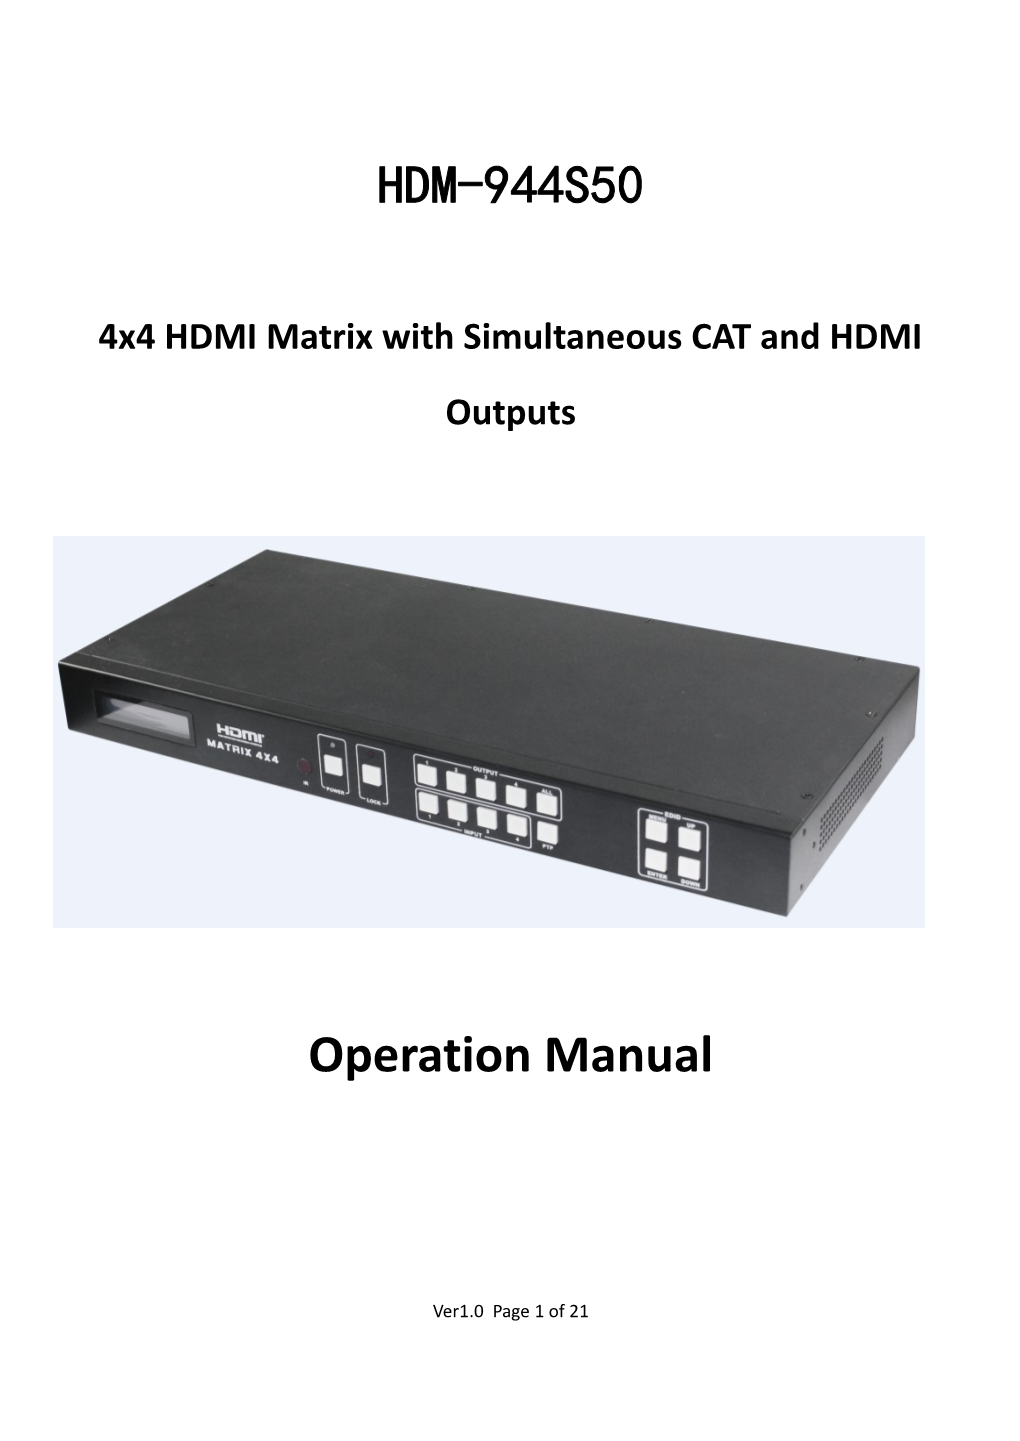 4X4 HDMI Matrix with Simultaneous CAT and HDMI Outputs